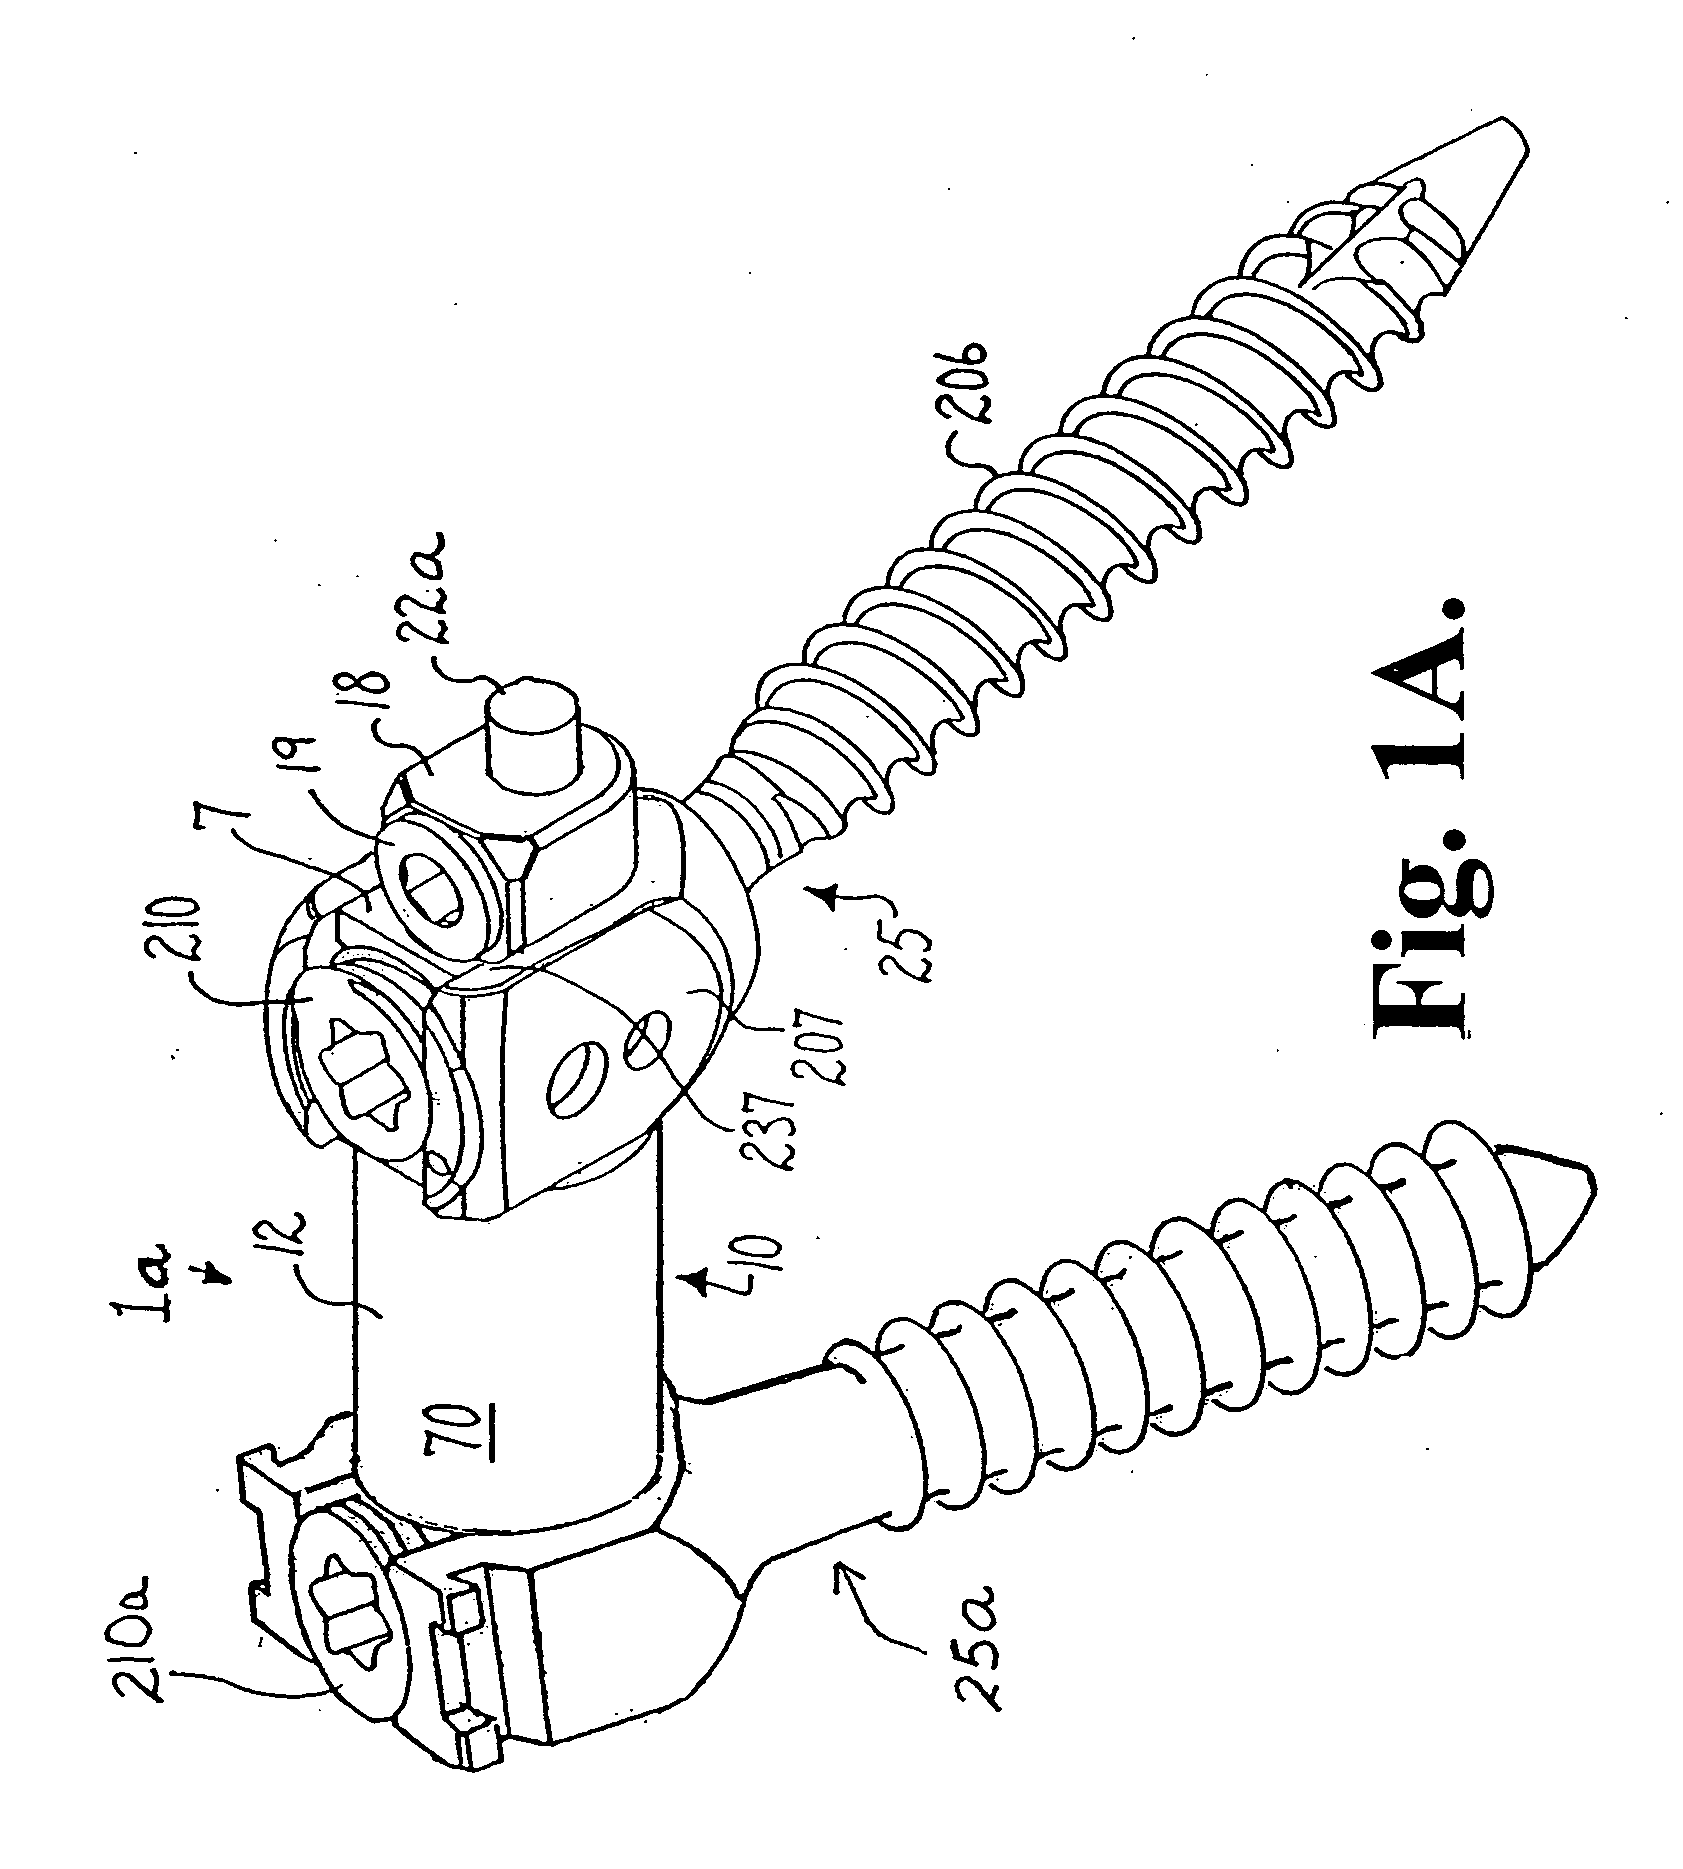 Longitudinal connecting member with sleeved tensioned cords